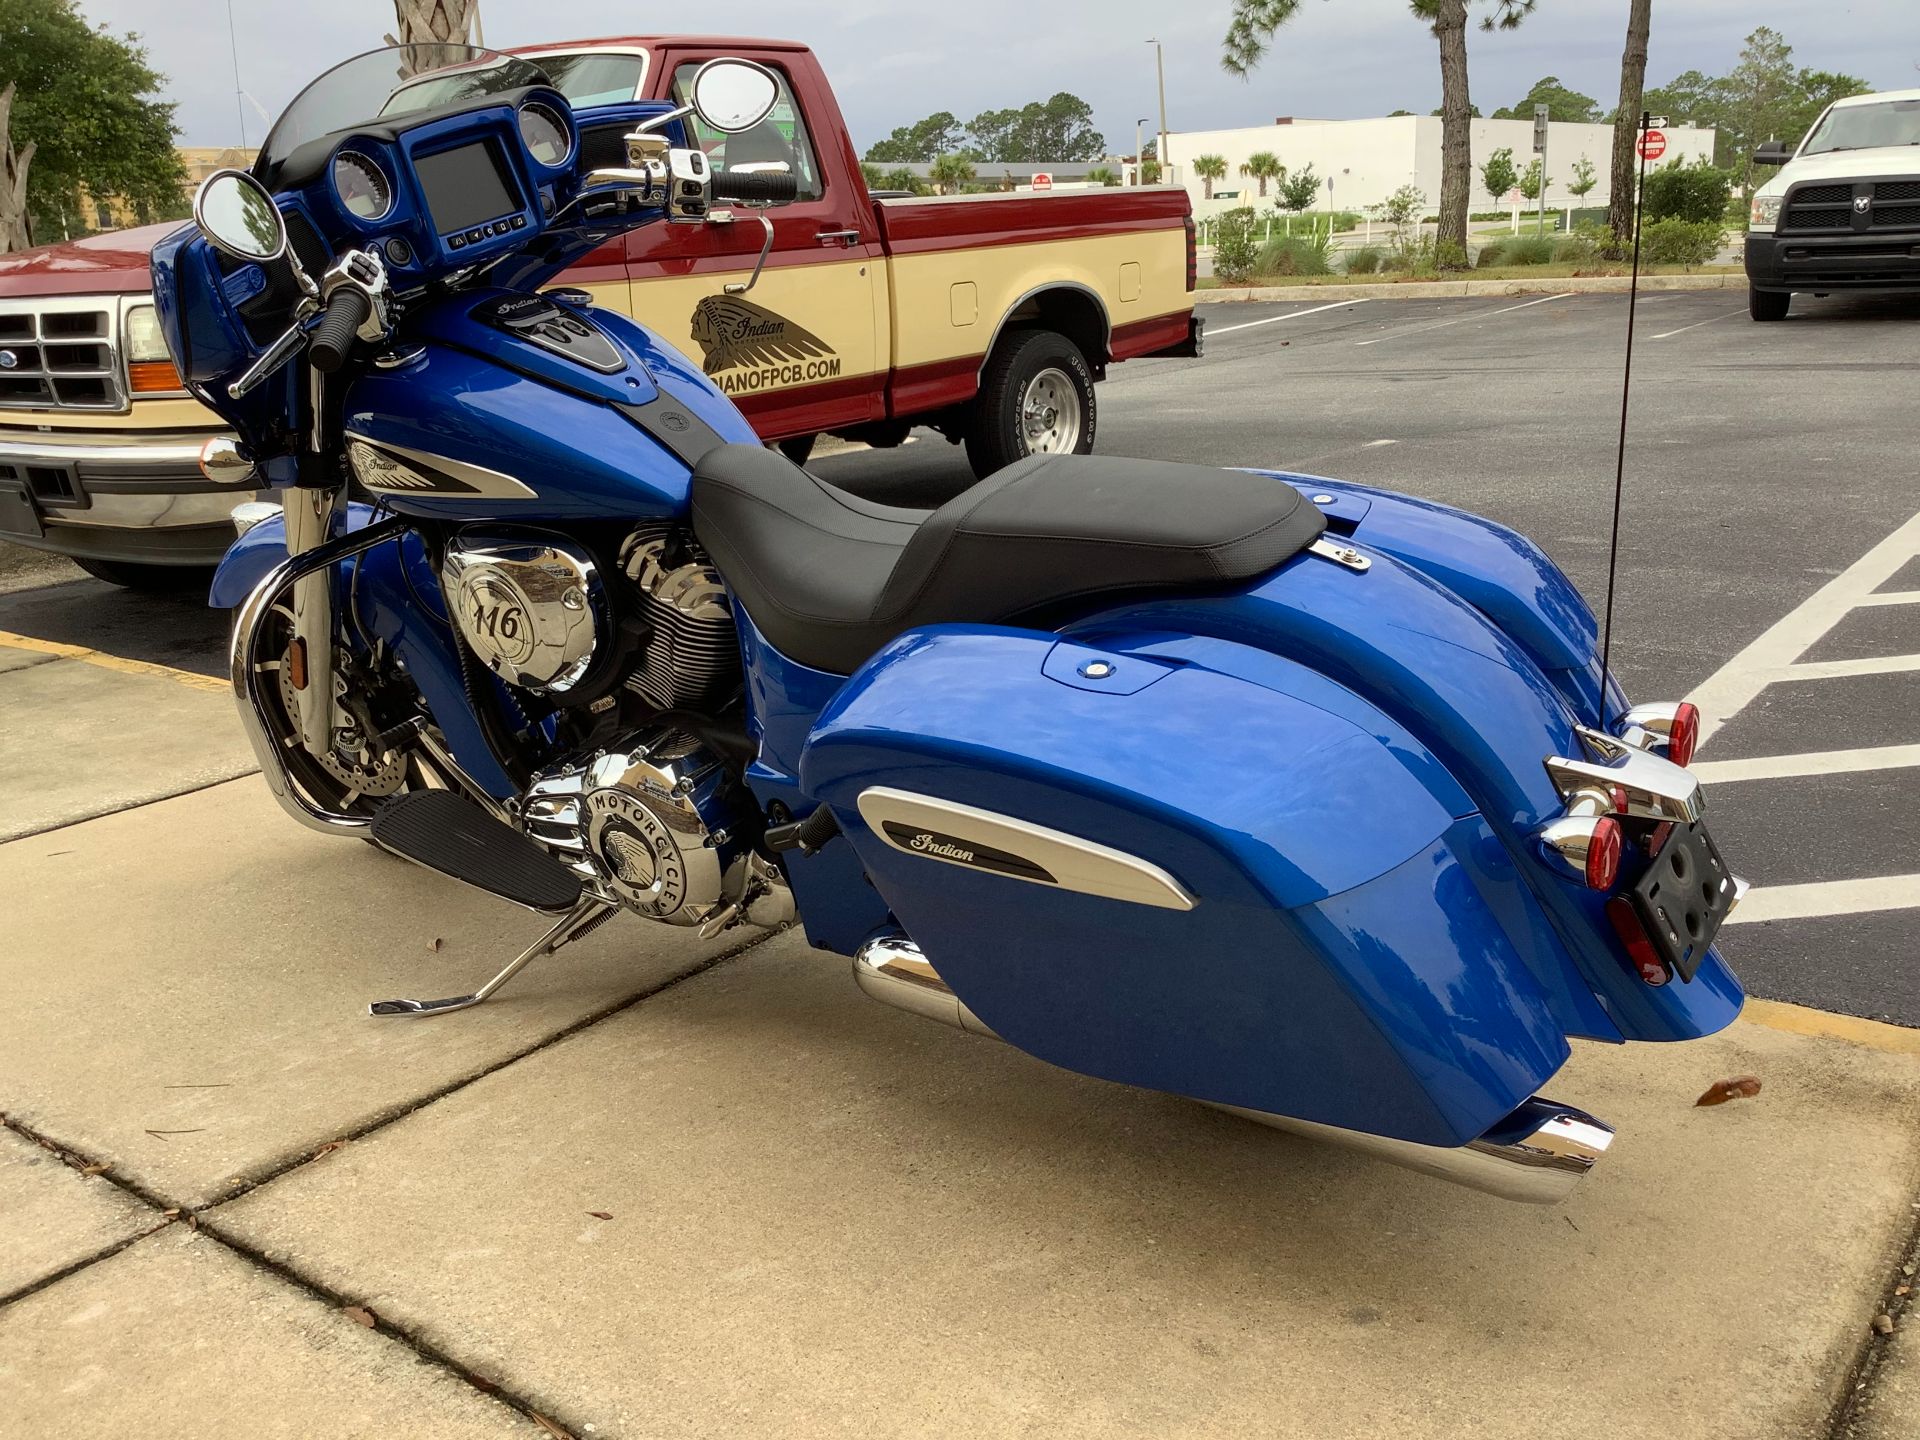 2020 Indian CHIEFTAIN LIMITED in Panama City Beach, Florida - Photo 8